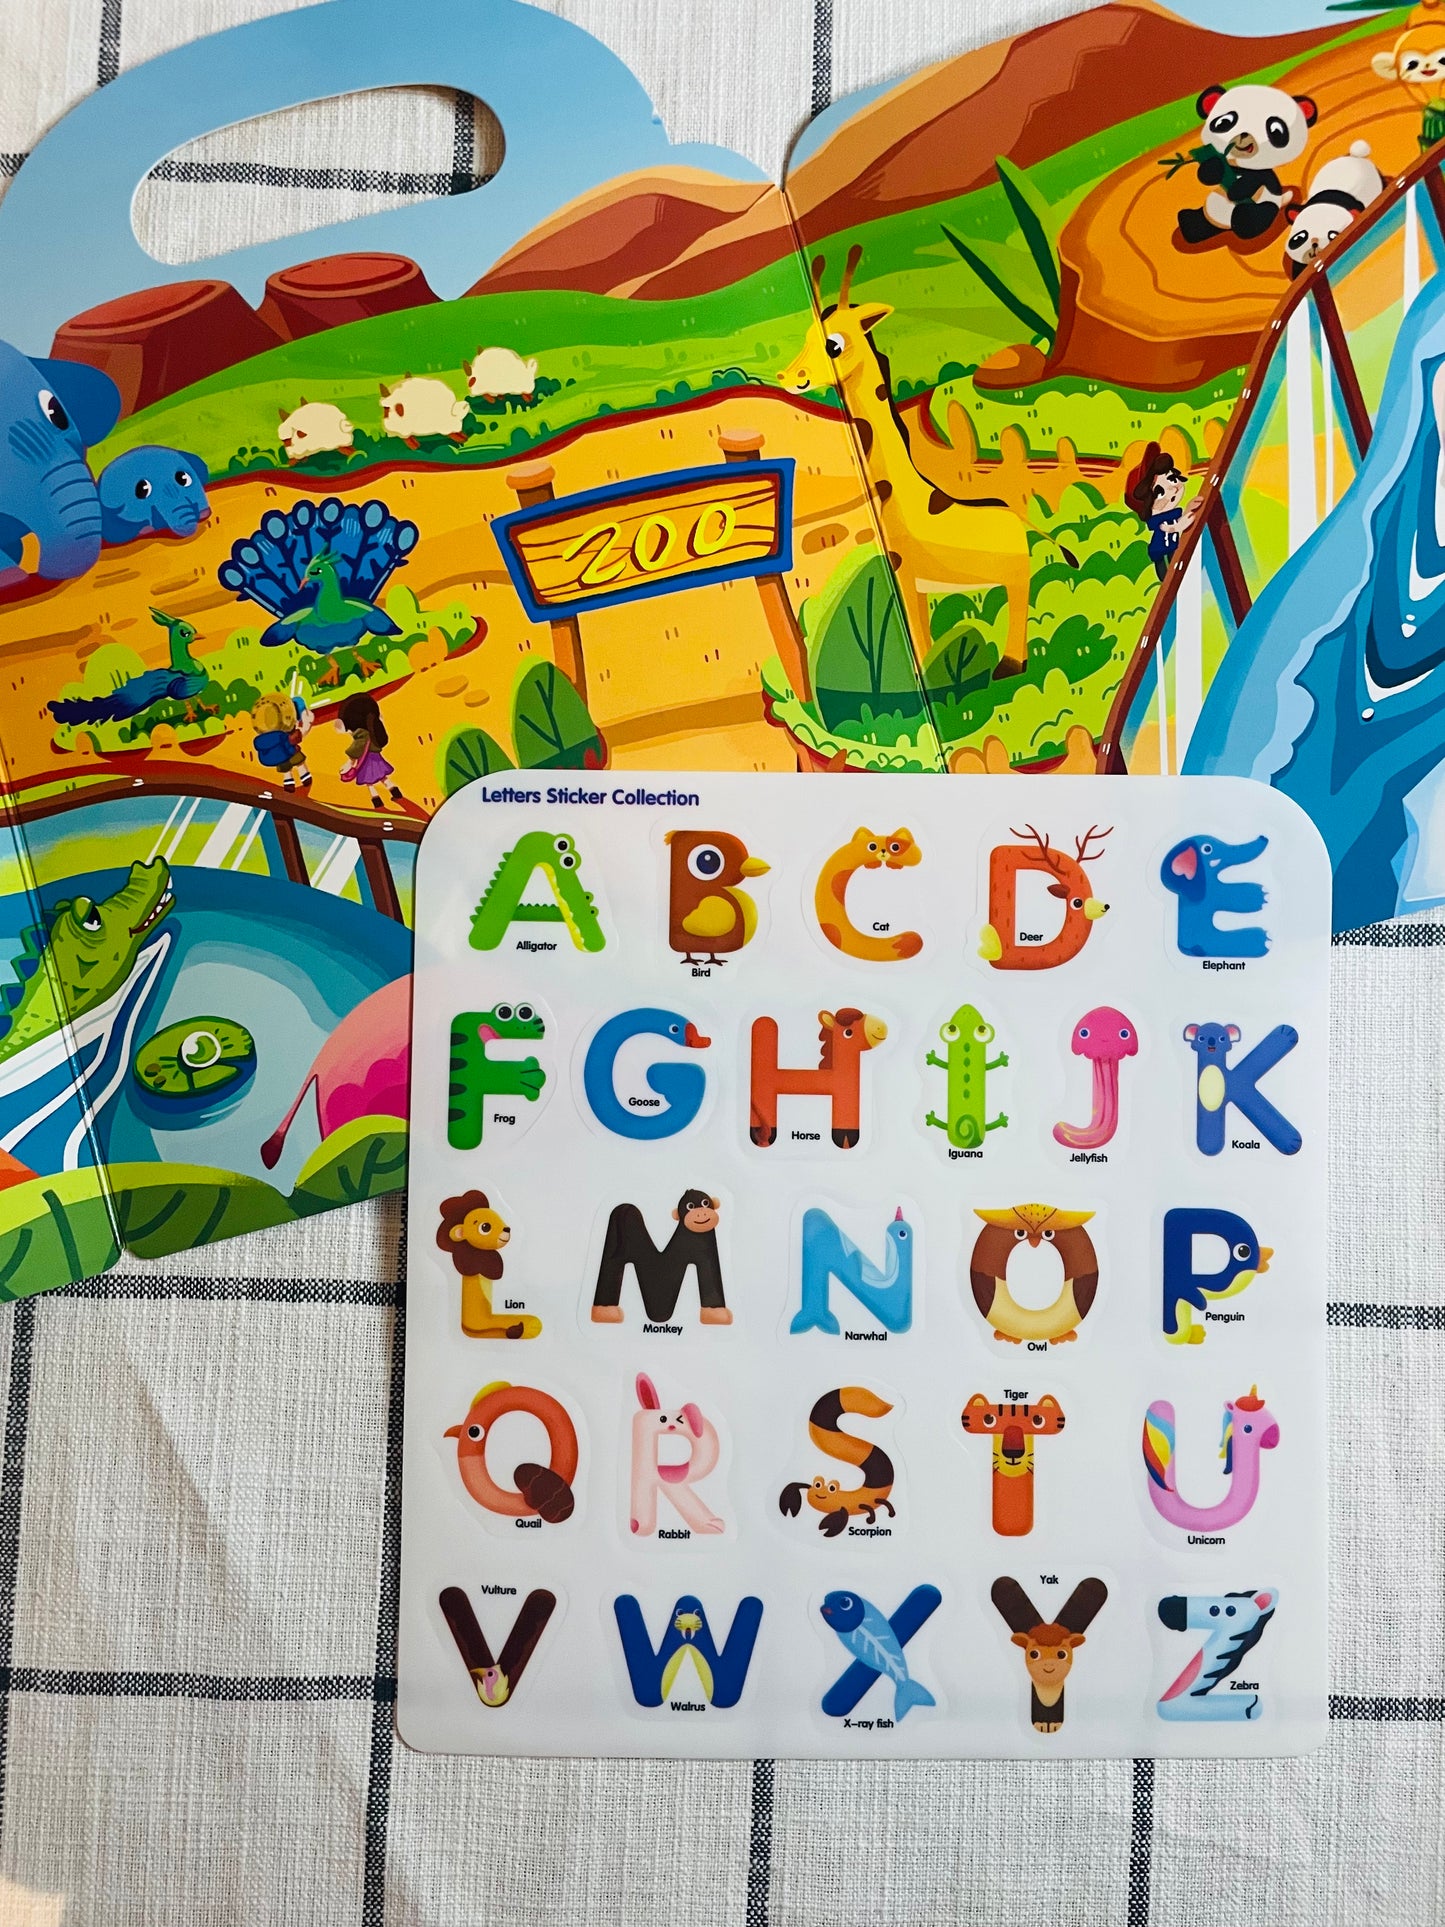 Re-useable Sticker Book | Letters